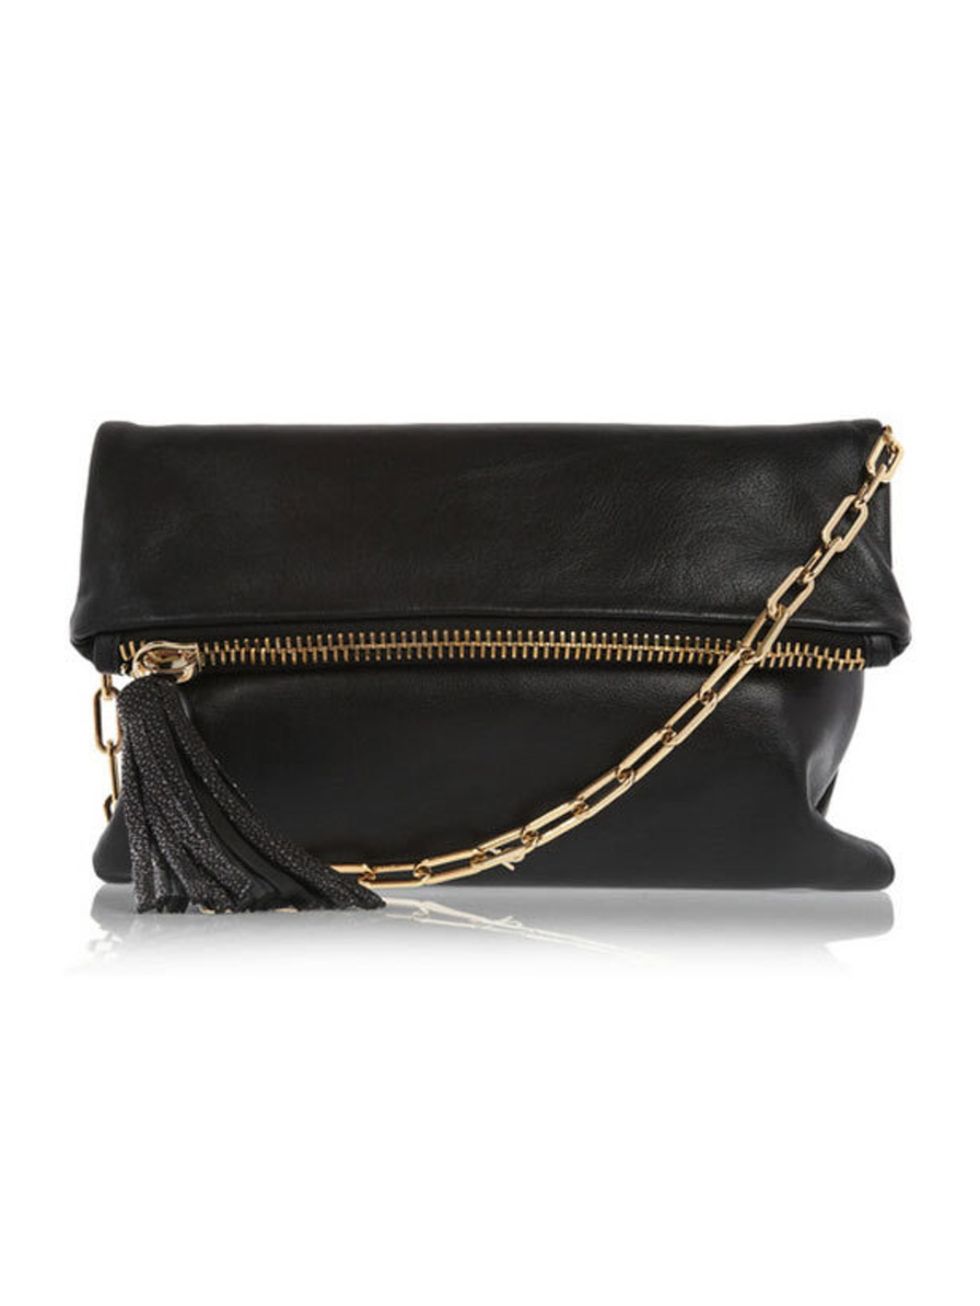 <p>Anya Hindmarch 'Huxley' stingray-trimmed leather clutch, £495, at Net-a-Porter</p>